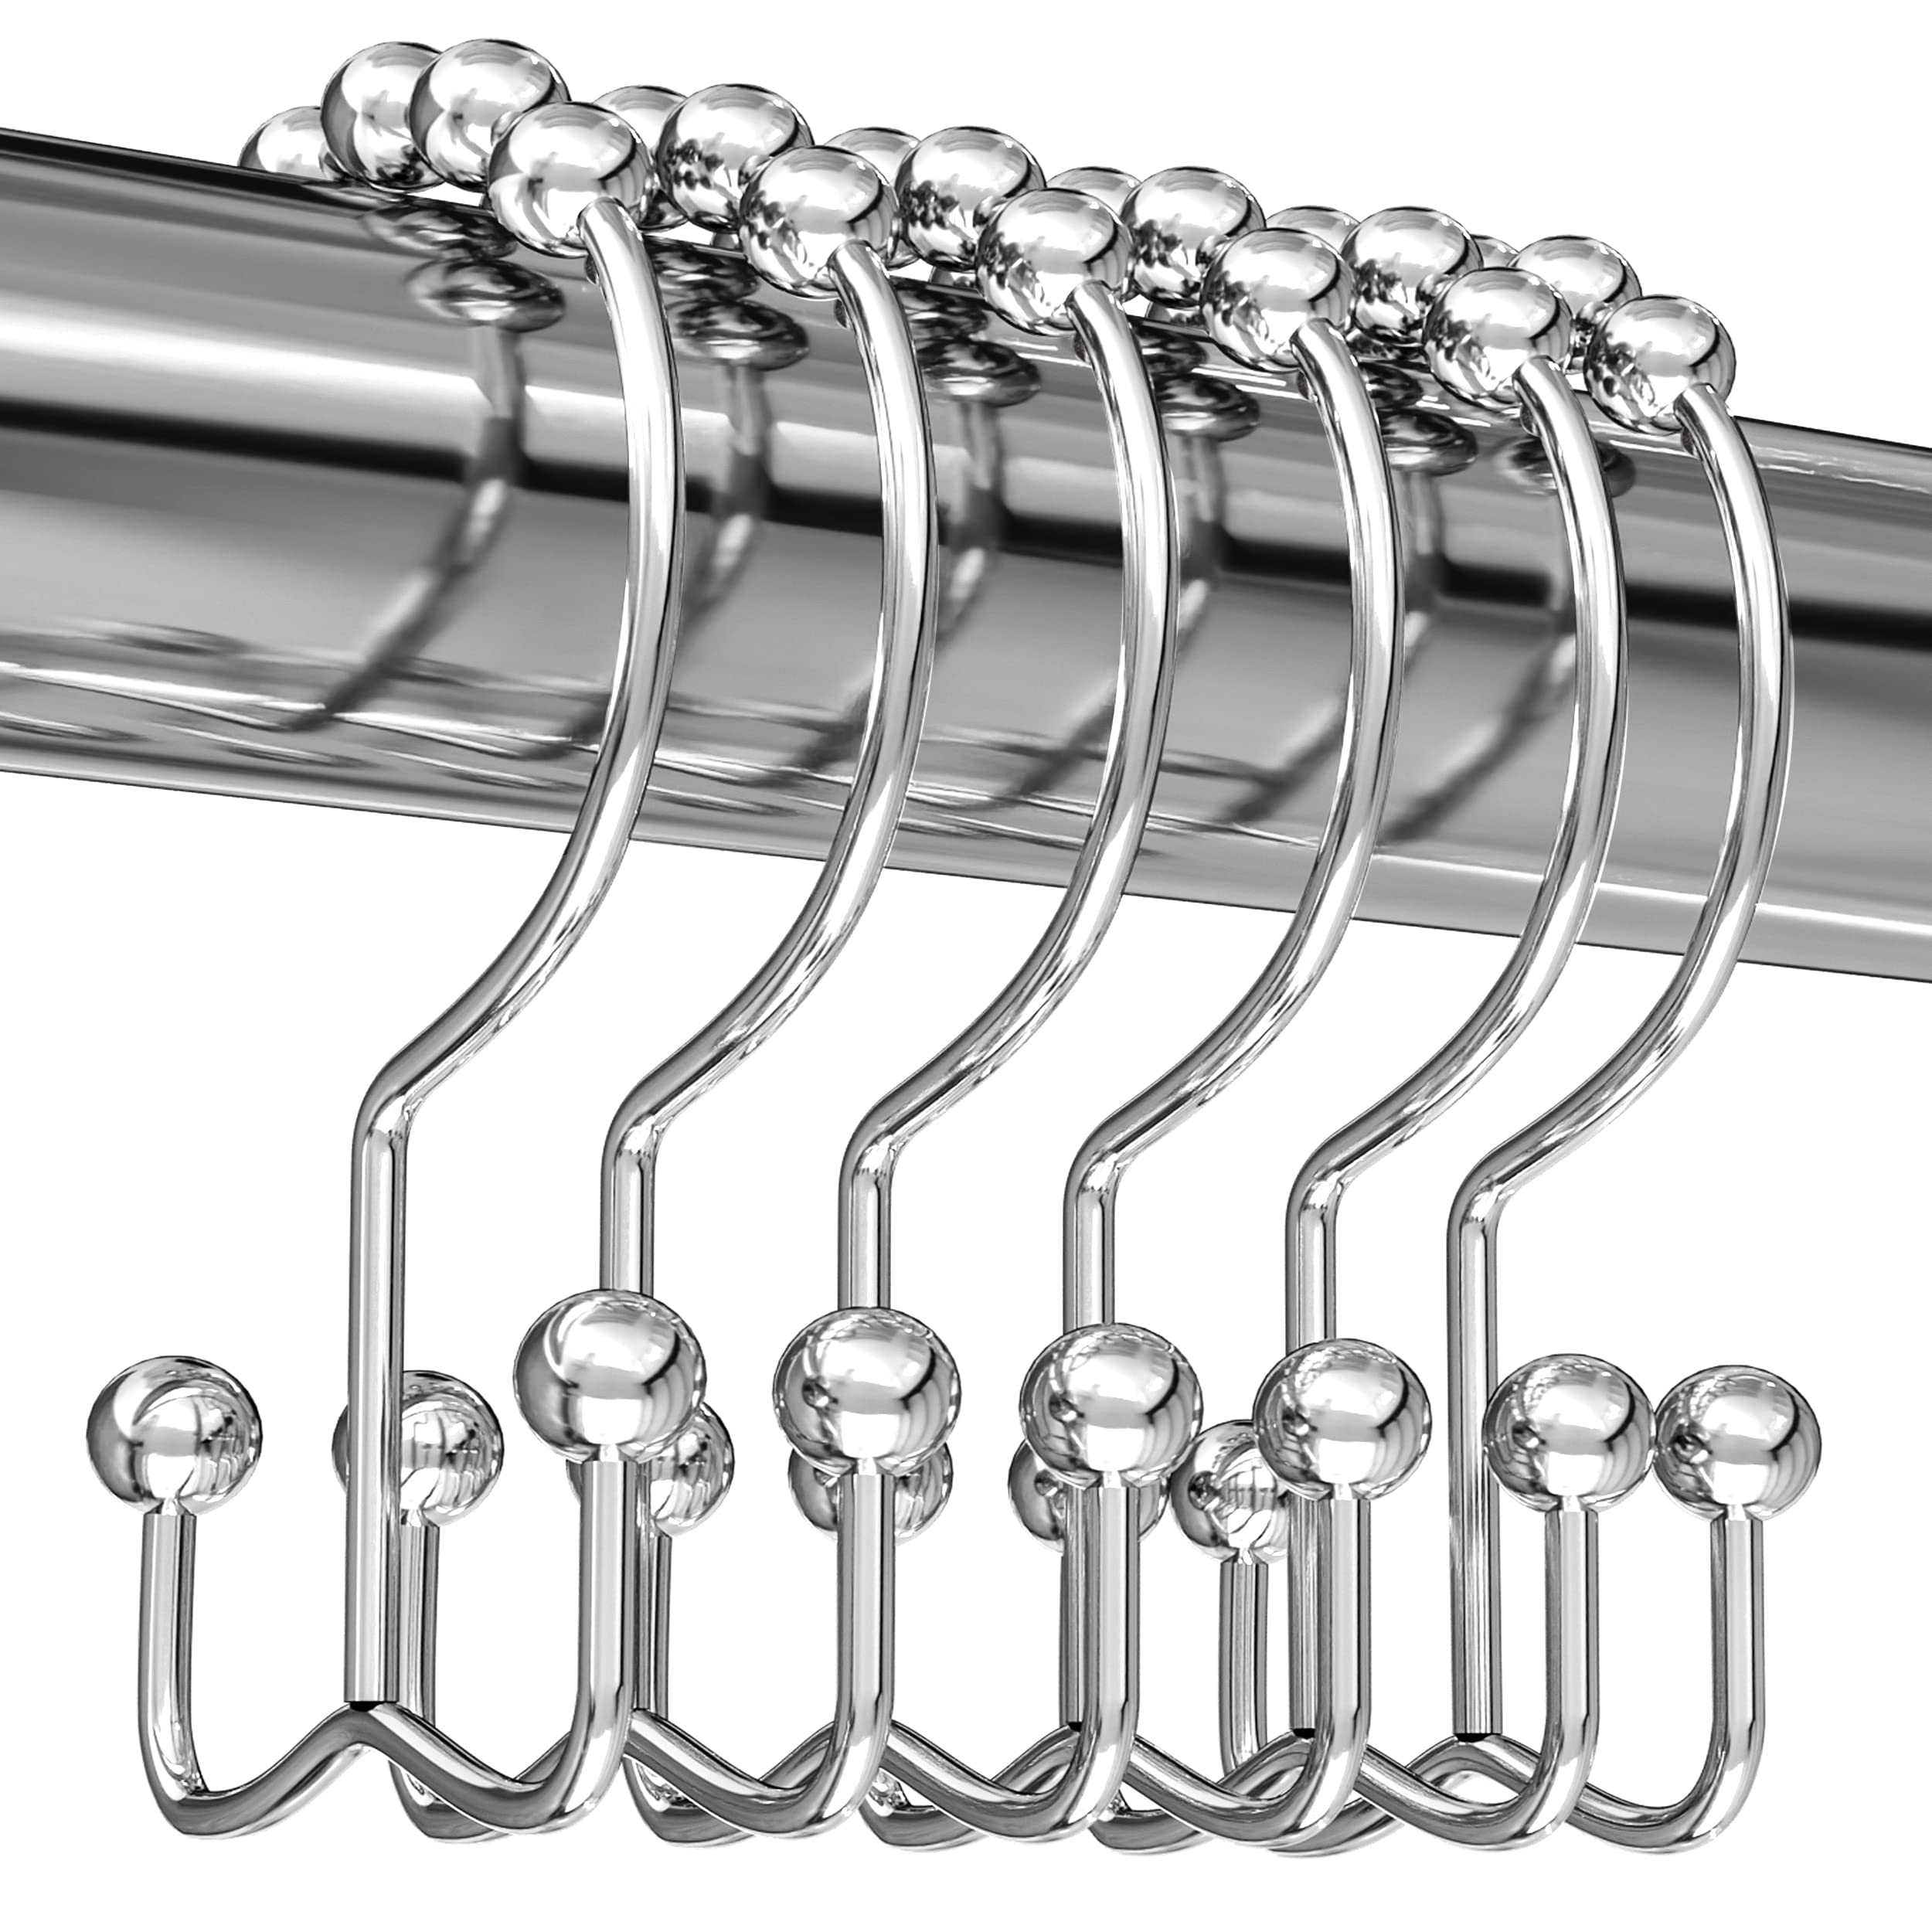 Book Cover Utopia Bedding Shower Curtain Hooks Shower Rings Double Glide Roller - Polished Chrome - Set of 12 Rings (Bronze)